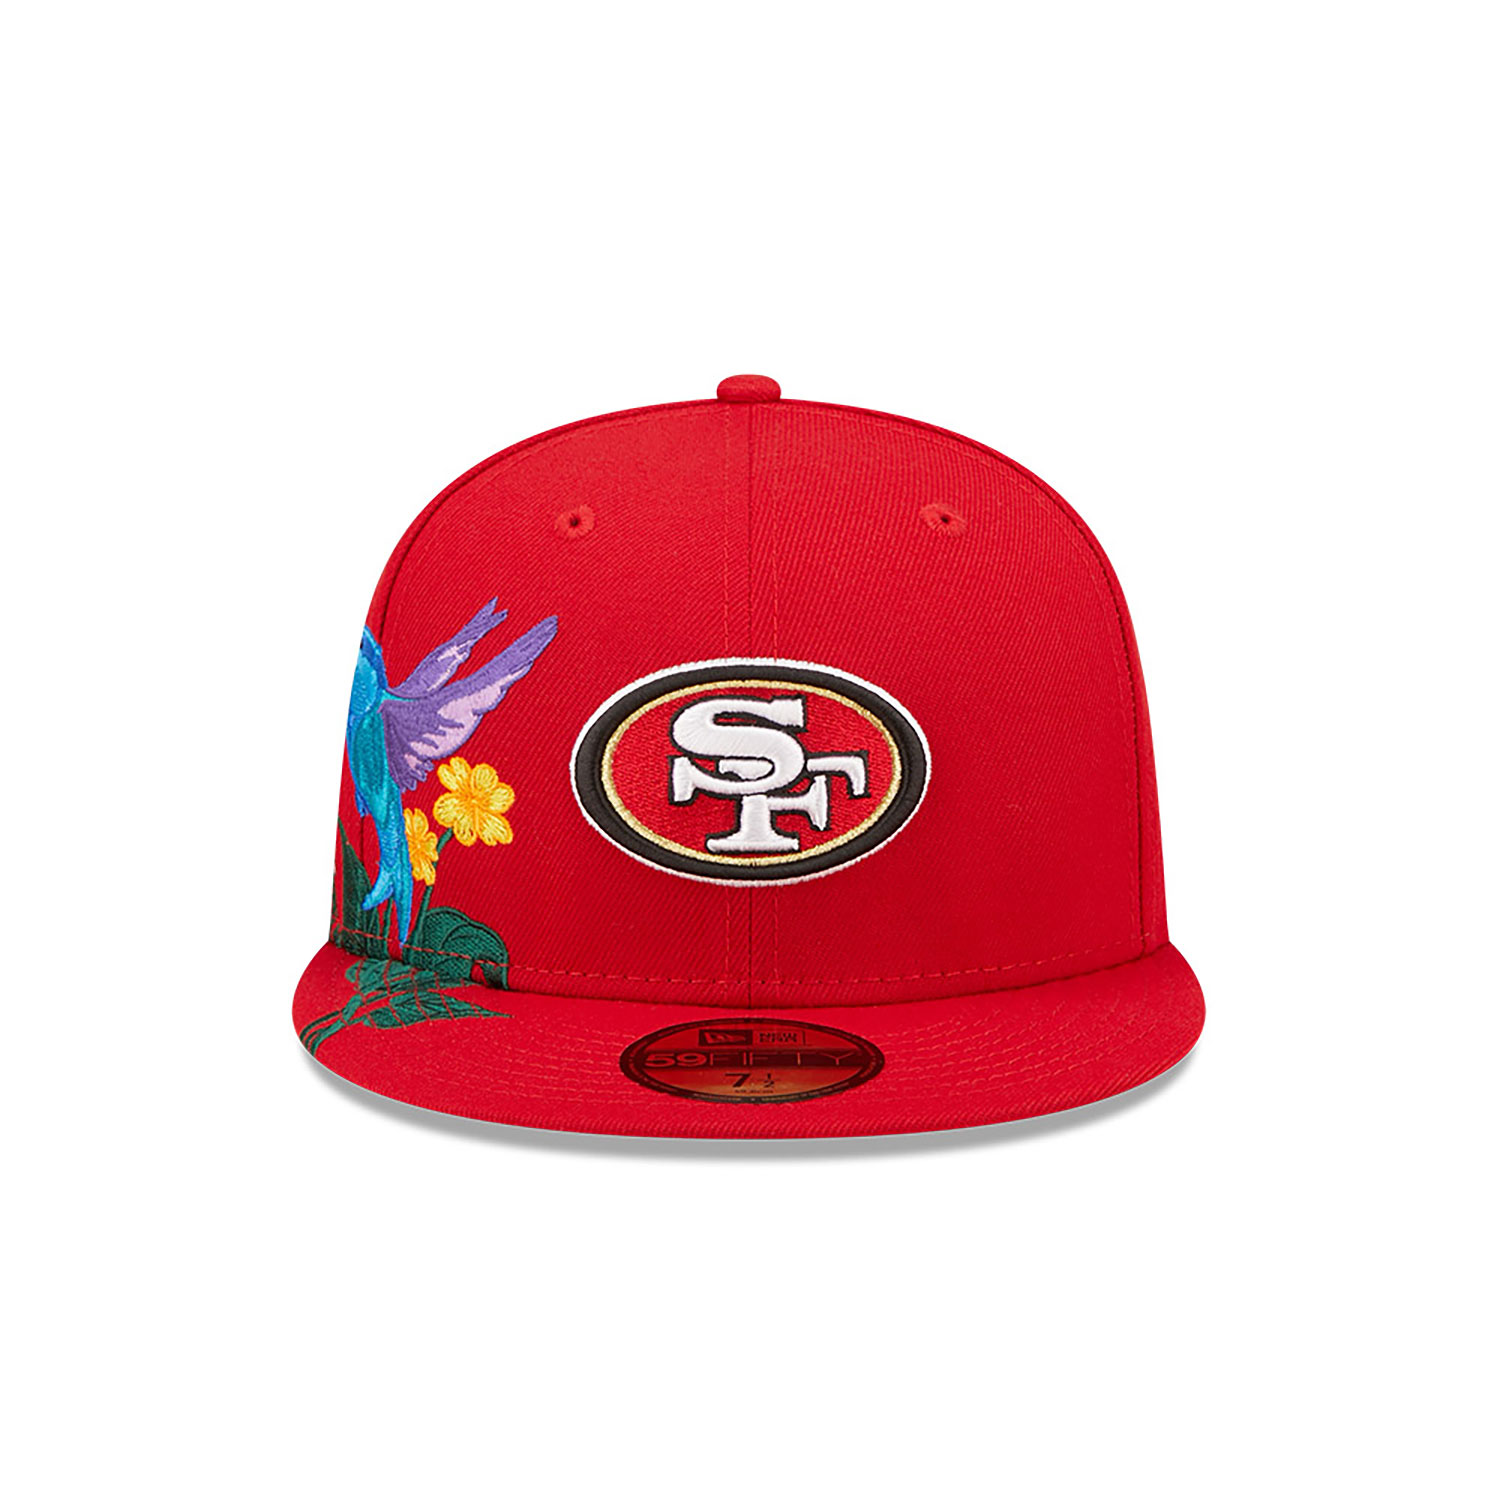 49ers red hat